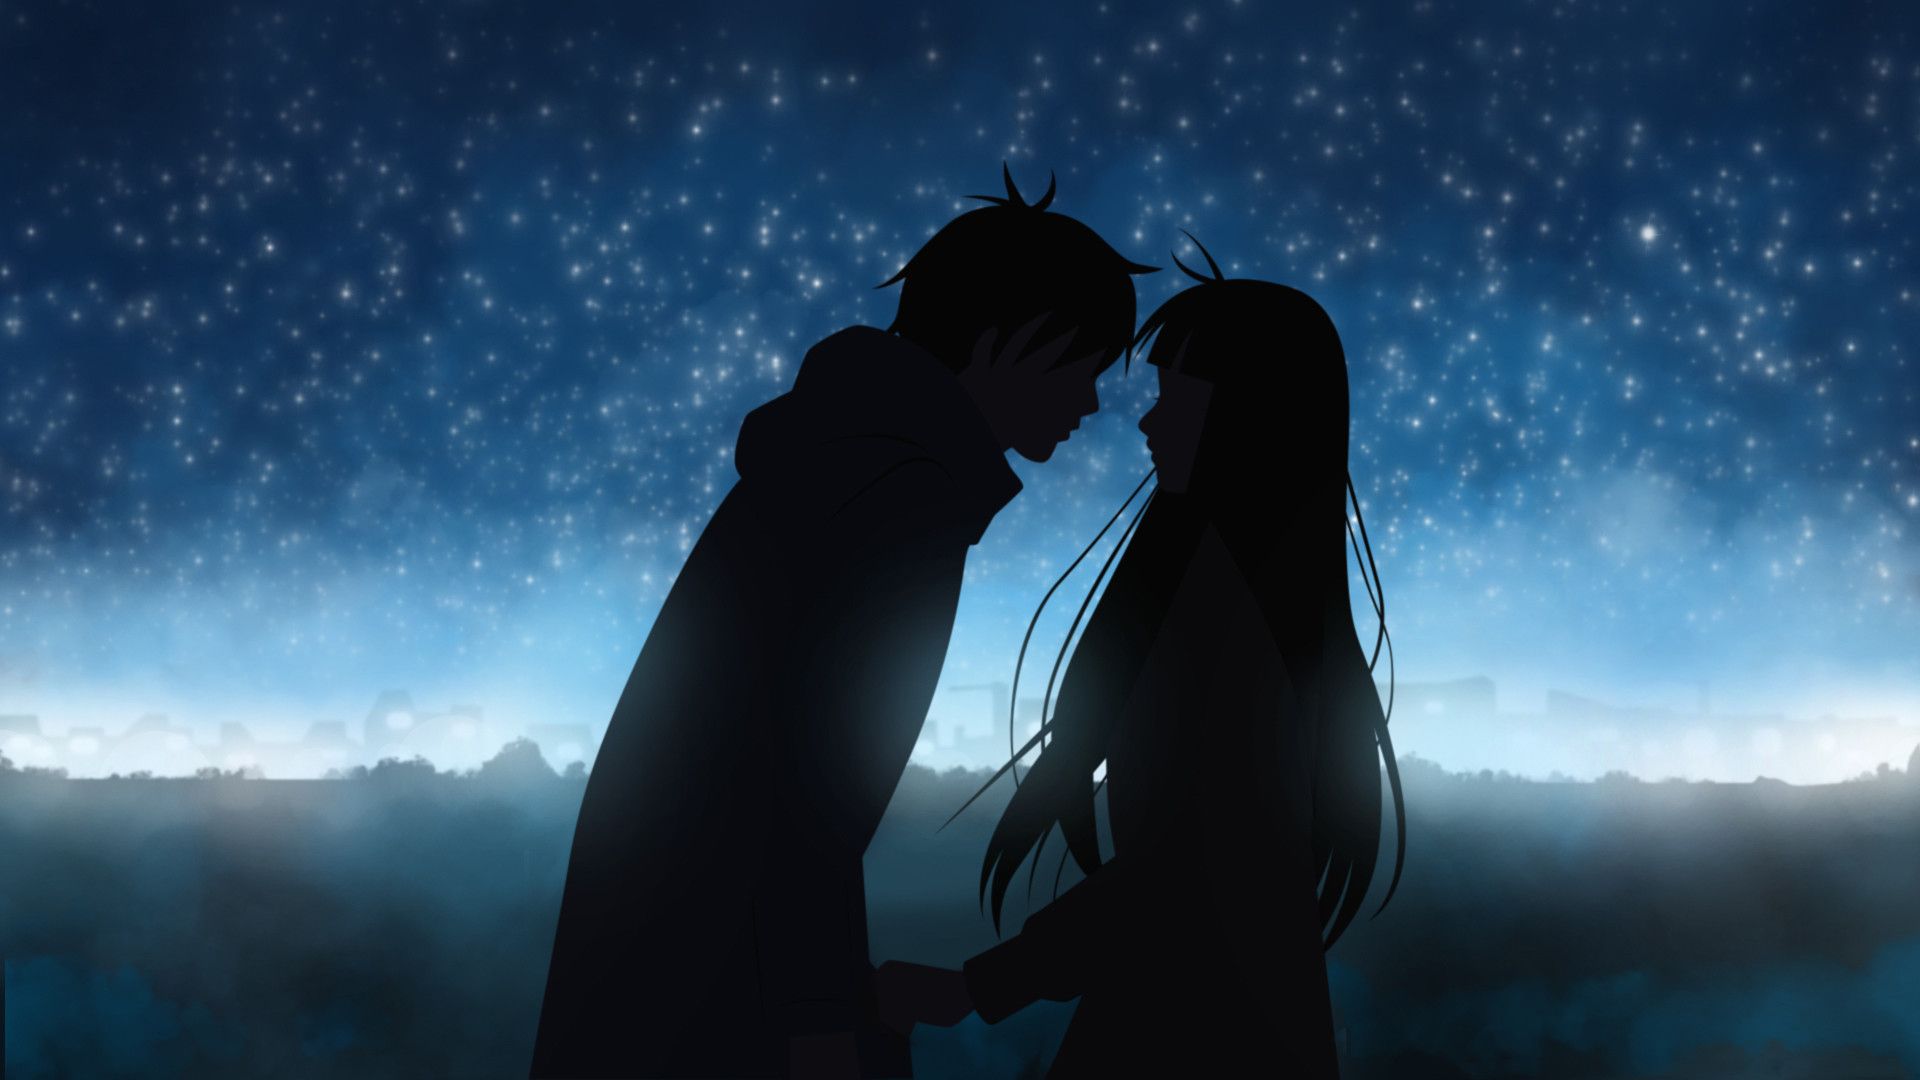 A silhouette of a man and woman standing under a starry sky - Dark anime